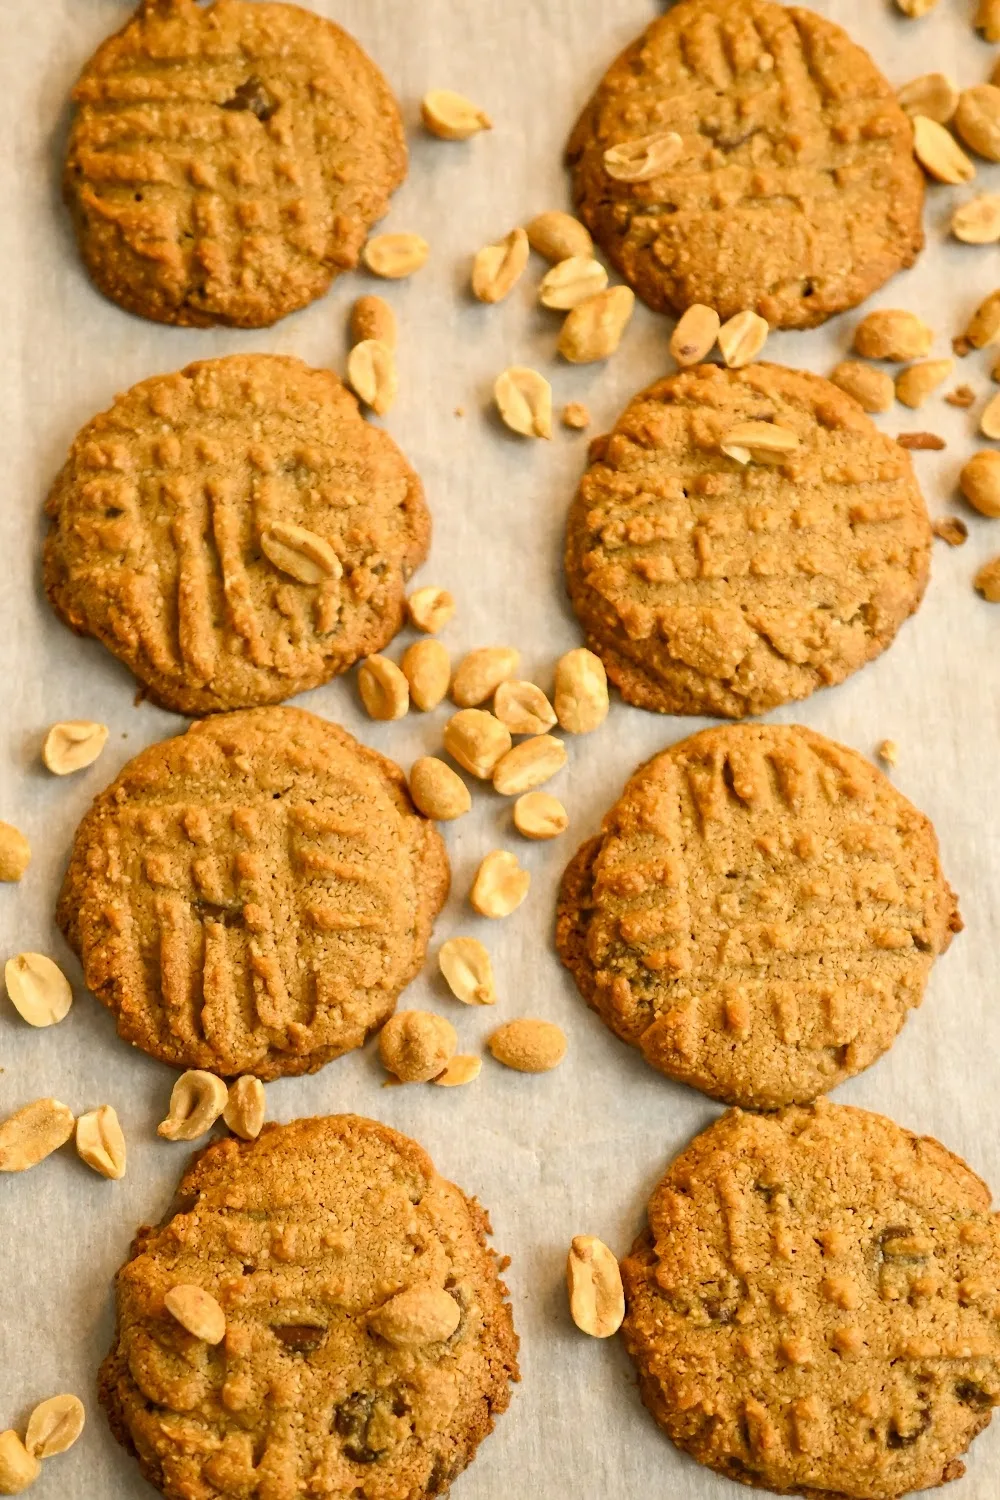 Keto peanut butter chocolate chip cookies baked on a parchment lined cookie sheet with peanuts scattered on top